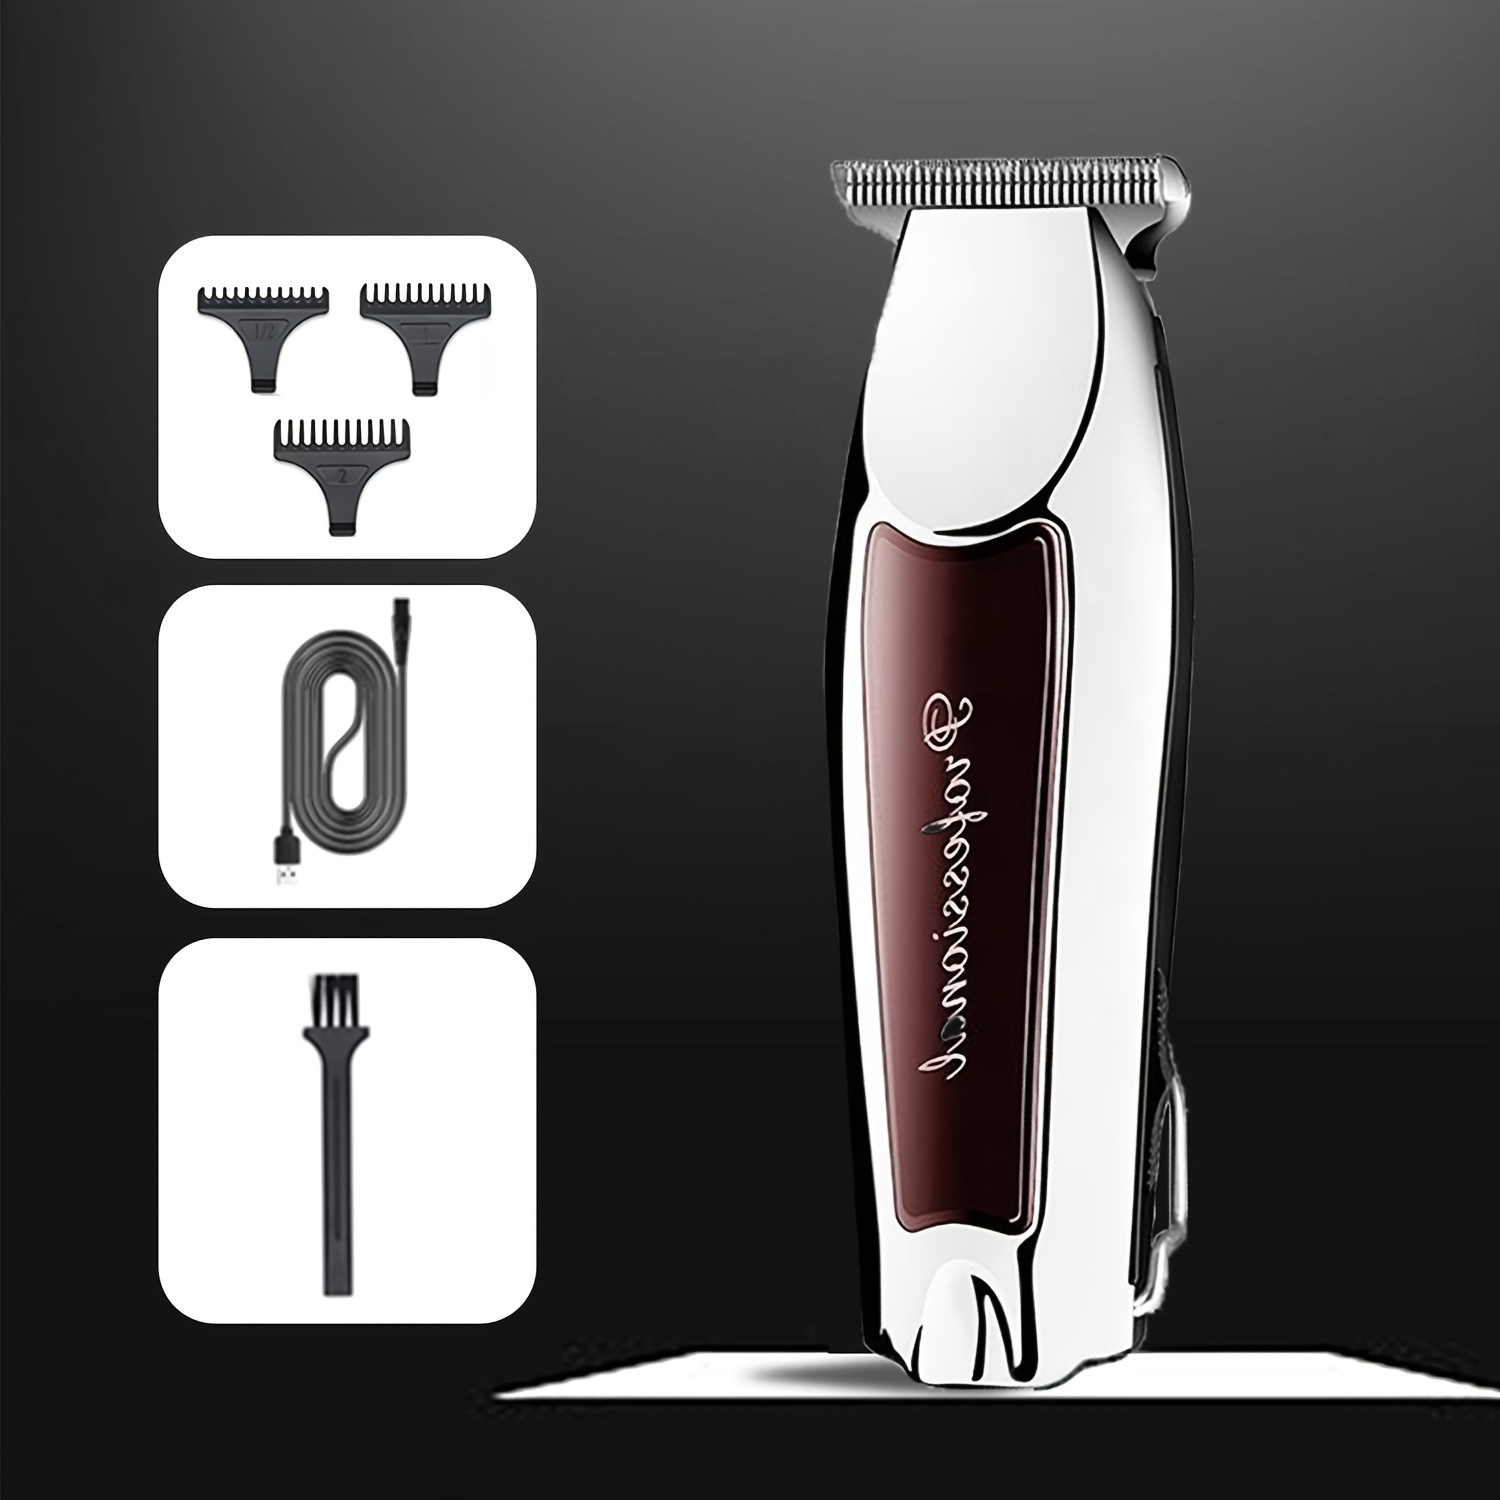 

Cordless Hair Trimmer Professional Hair Clipper Beard Shaver Hair Cutting Machine With 3 Guide Combs For Father's Day Gift Birthday Gift Father's Day Gift